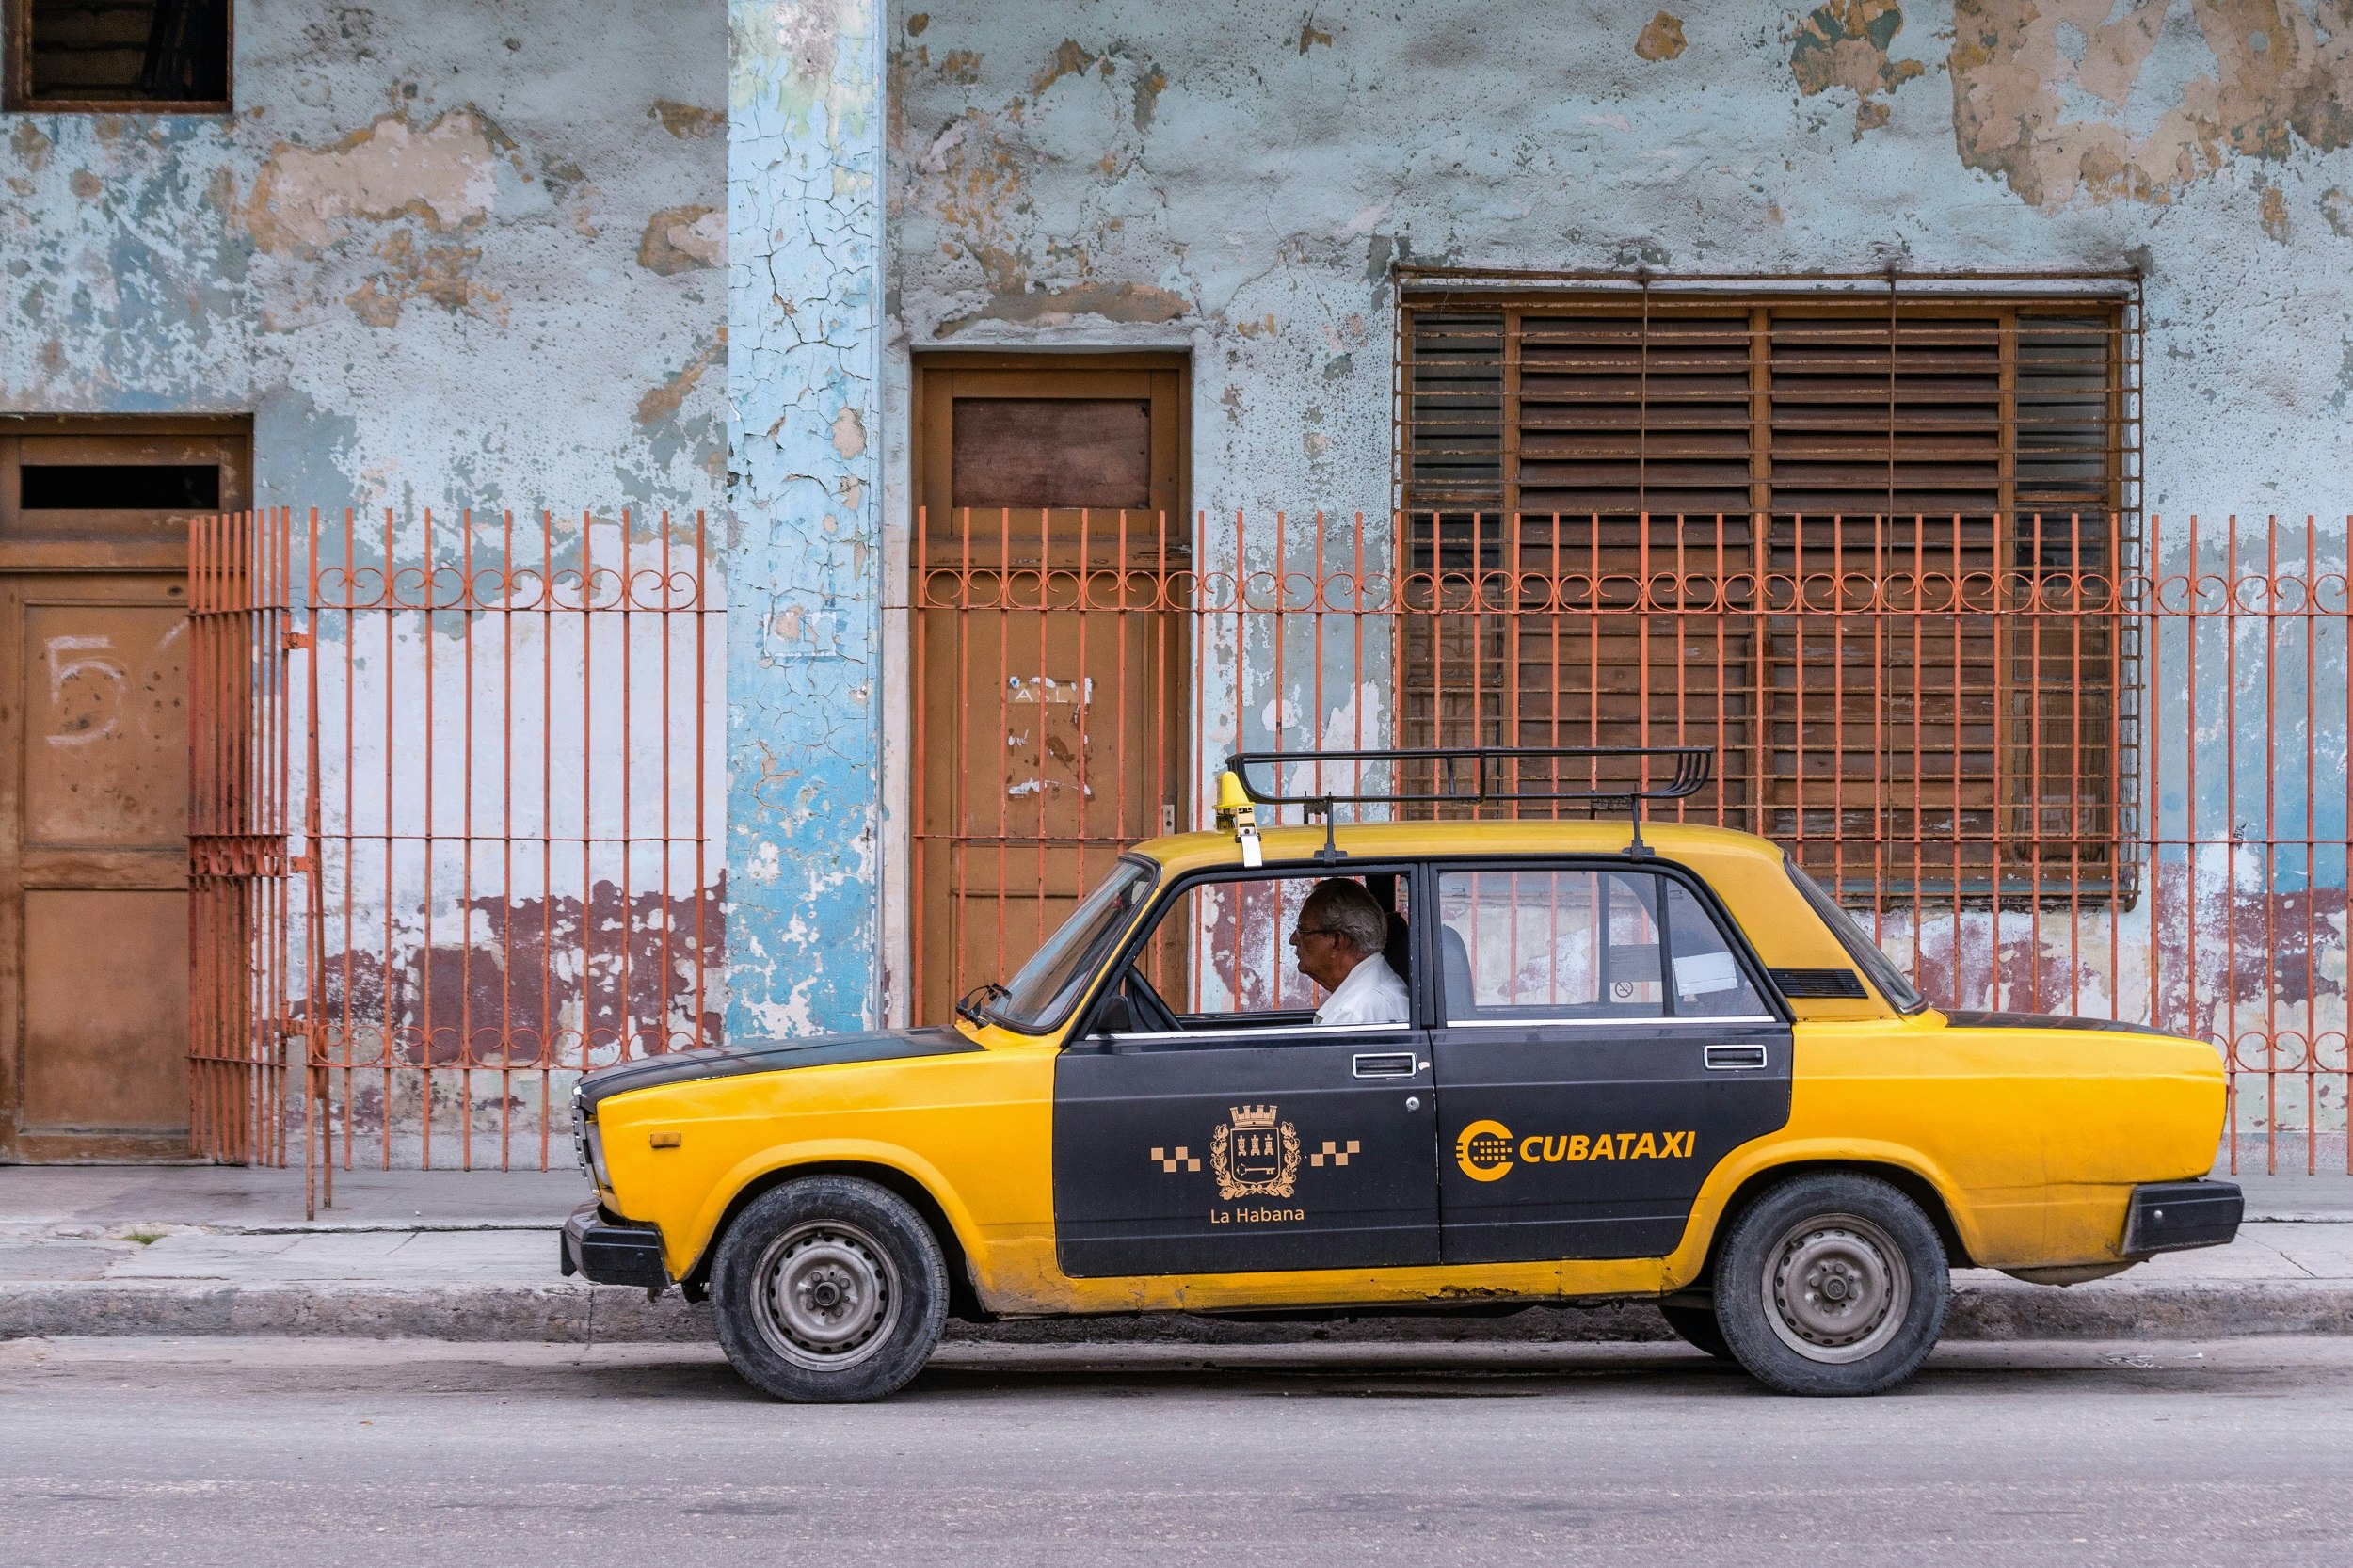 An old yellow Lada car, with its doors, hood and boot painted black, has CUBATAXI emblazoned on its rear door; it's driving past an older building with a barred fence surrounding it.